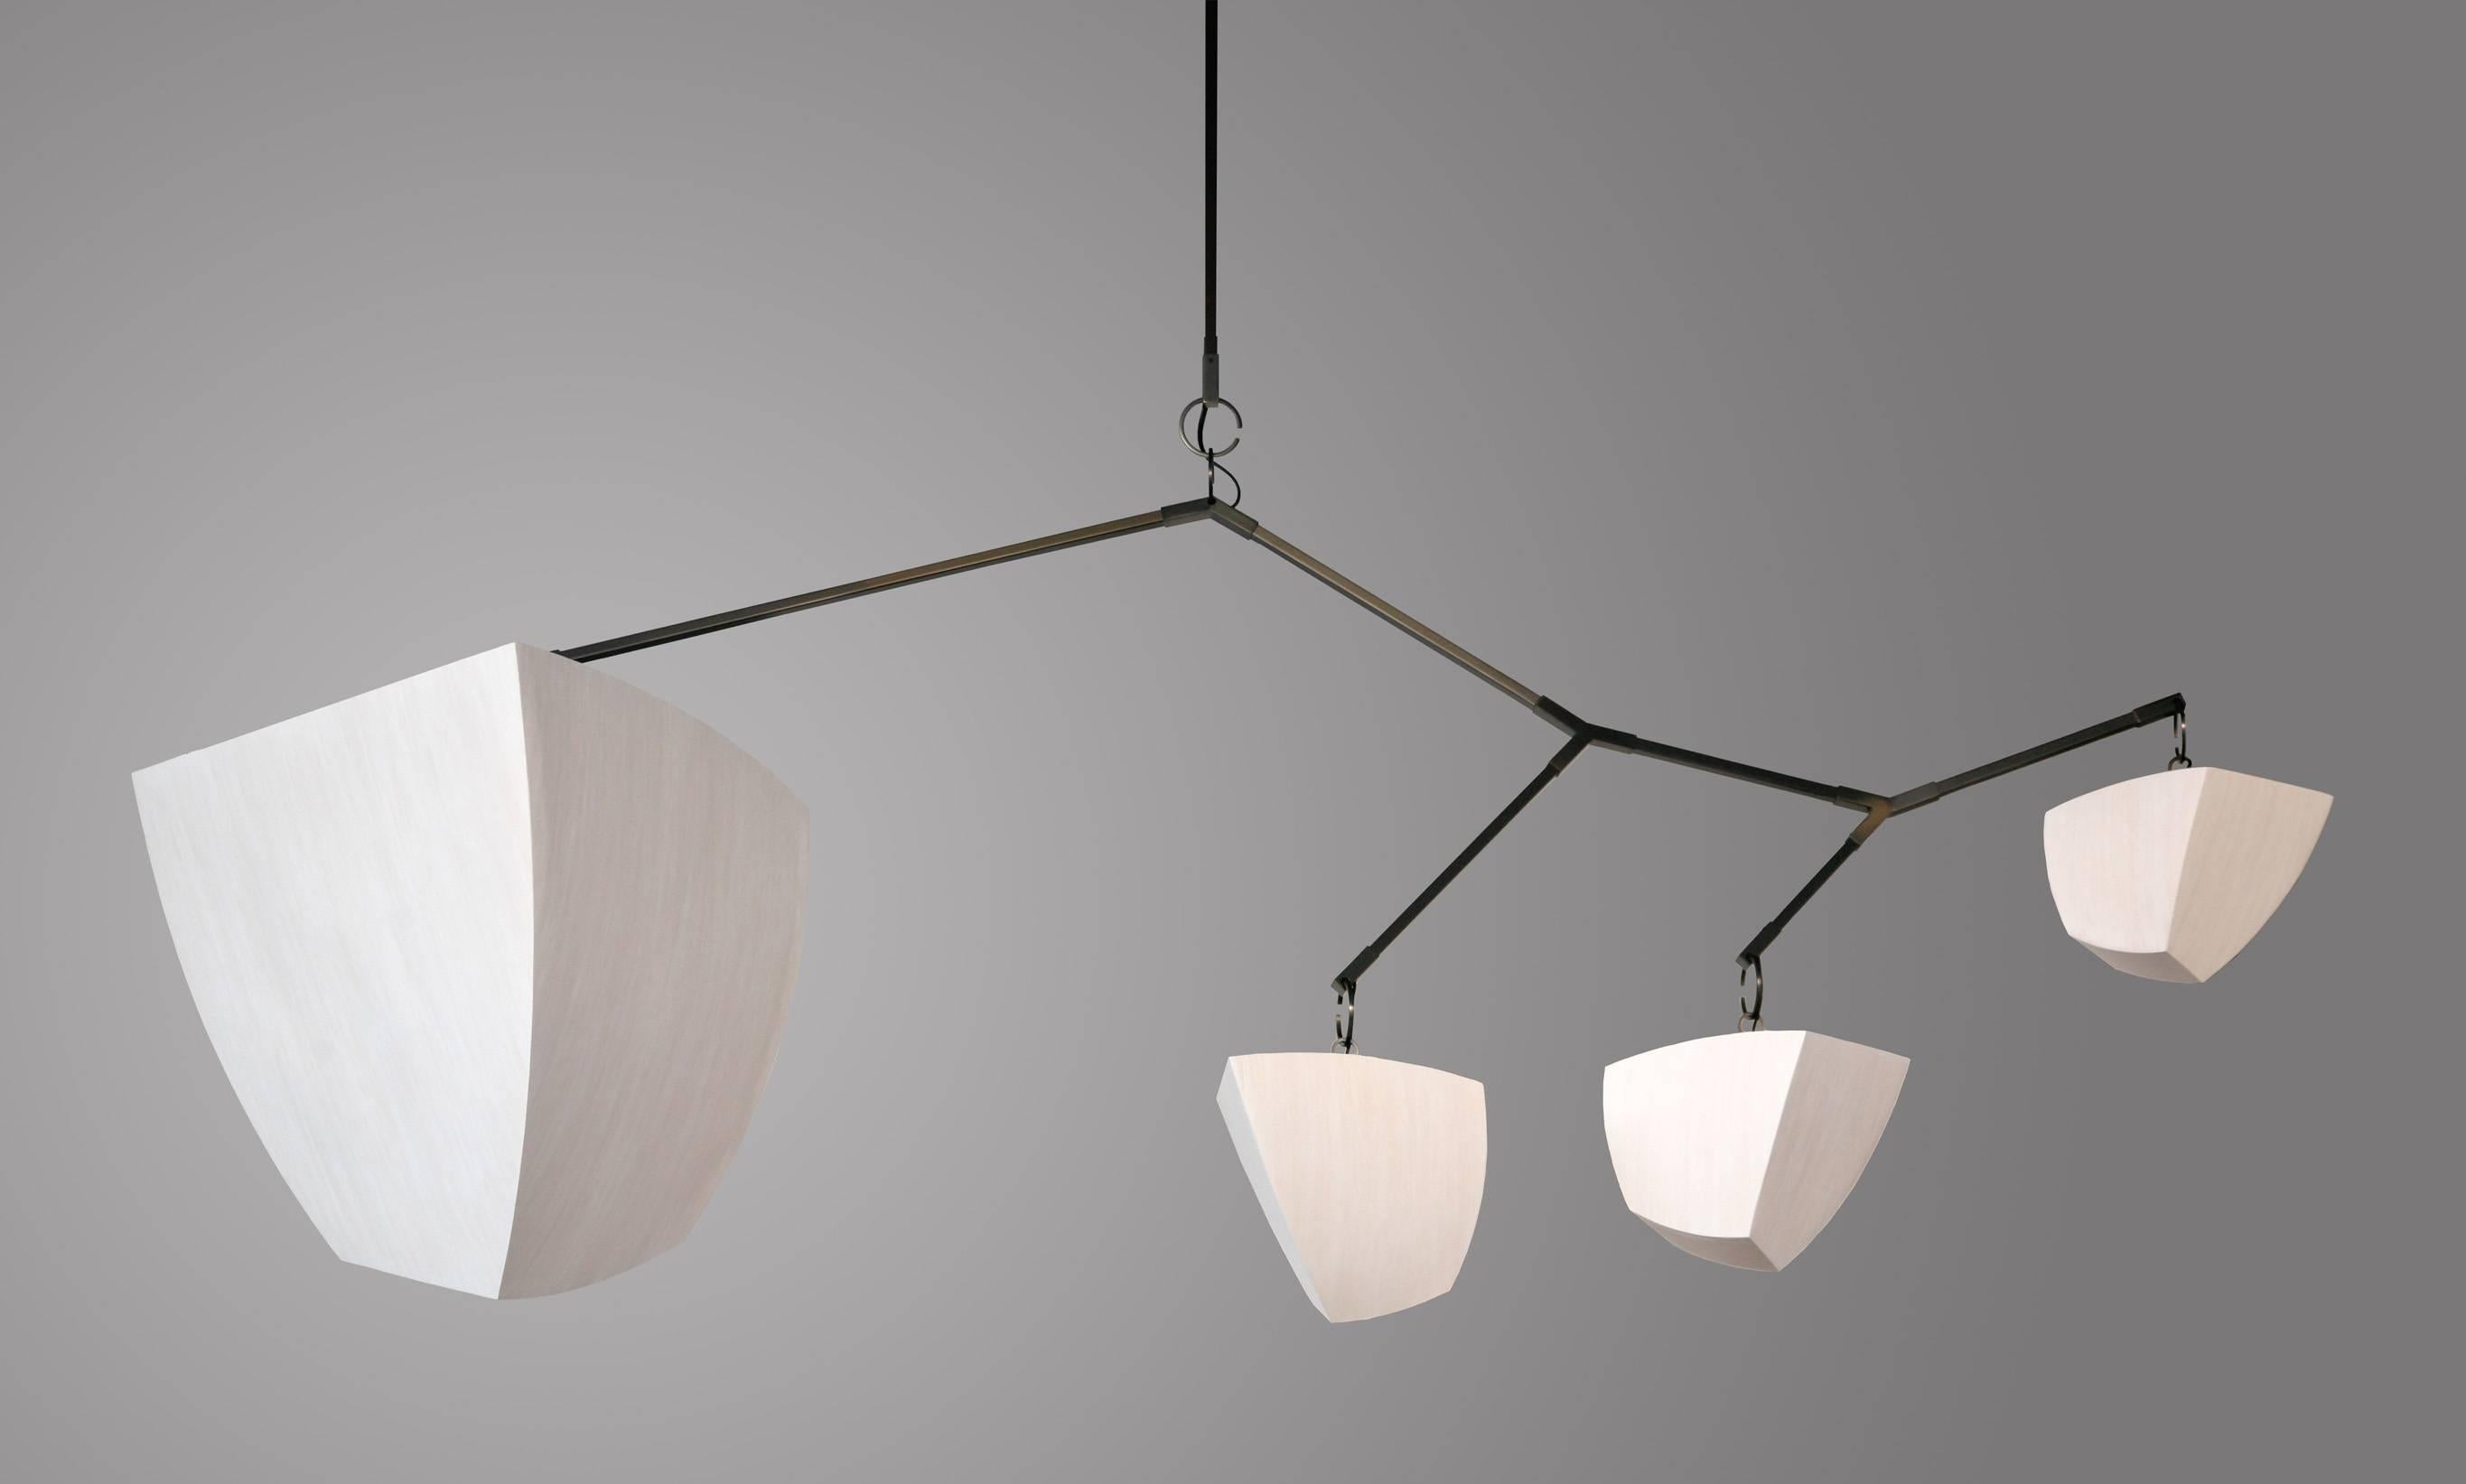 Our unique mobile chandelier can be configured into many variations, extended both vertically and horizontally. We work closely with our designers to explore what will work perfectly for their projects. Utilizing 3D models, full scale mock-ups, and